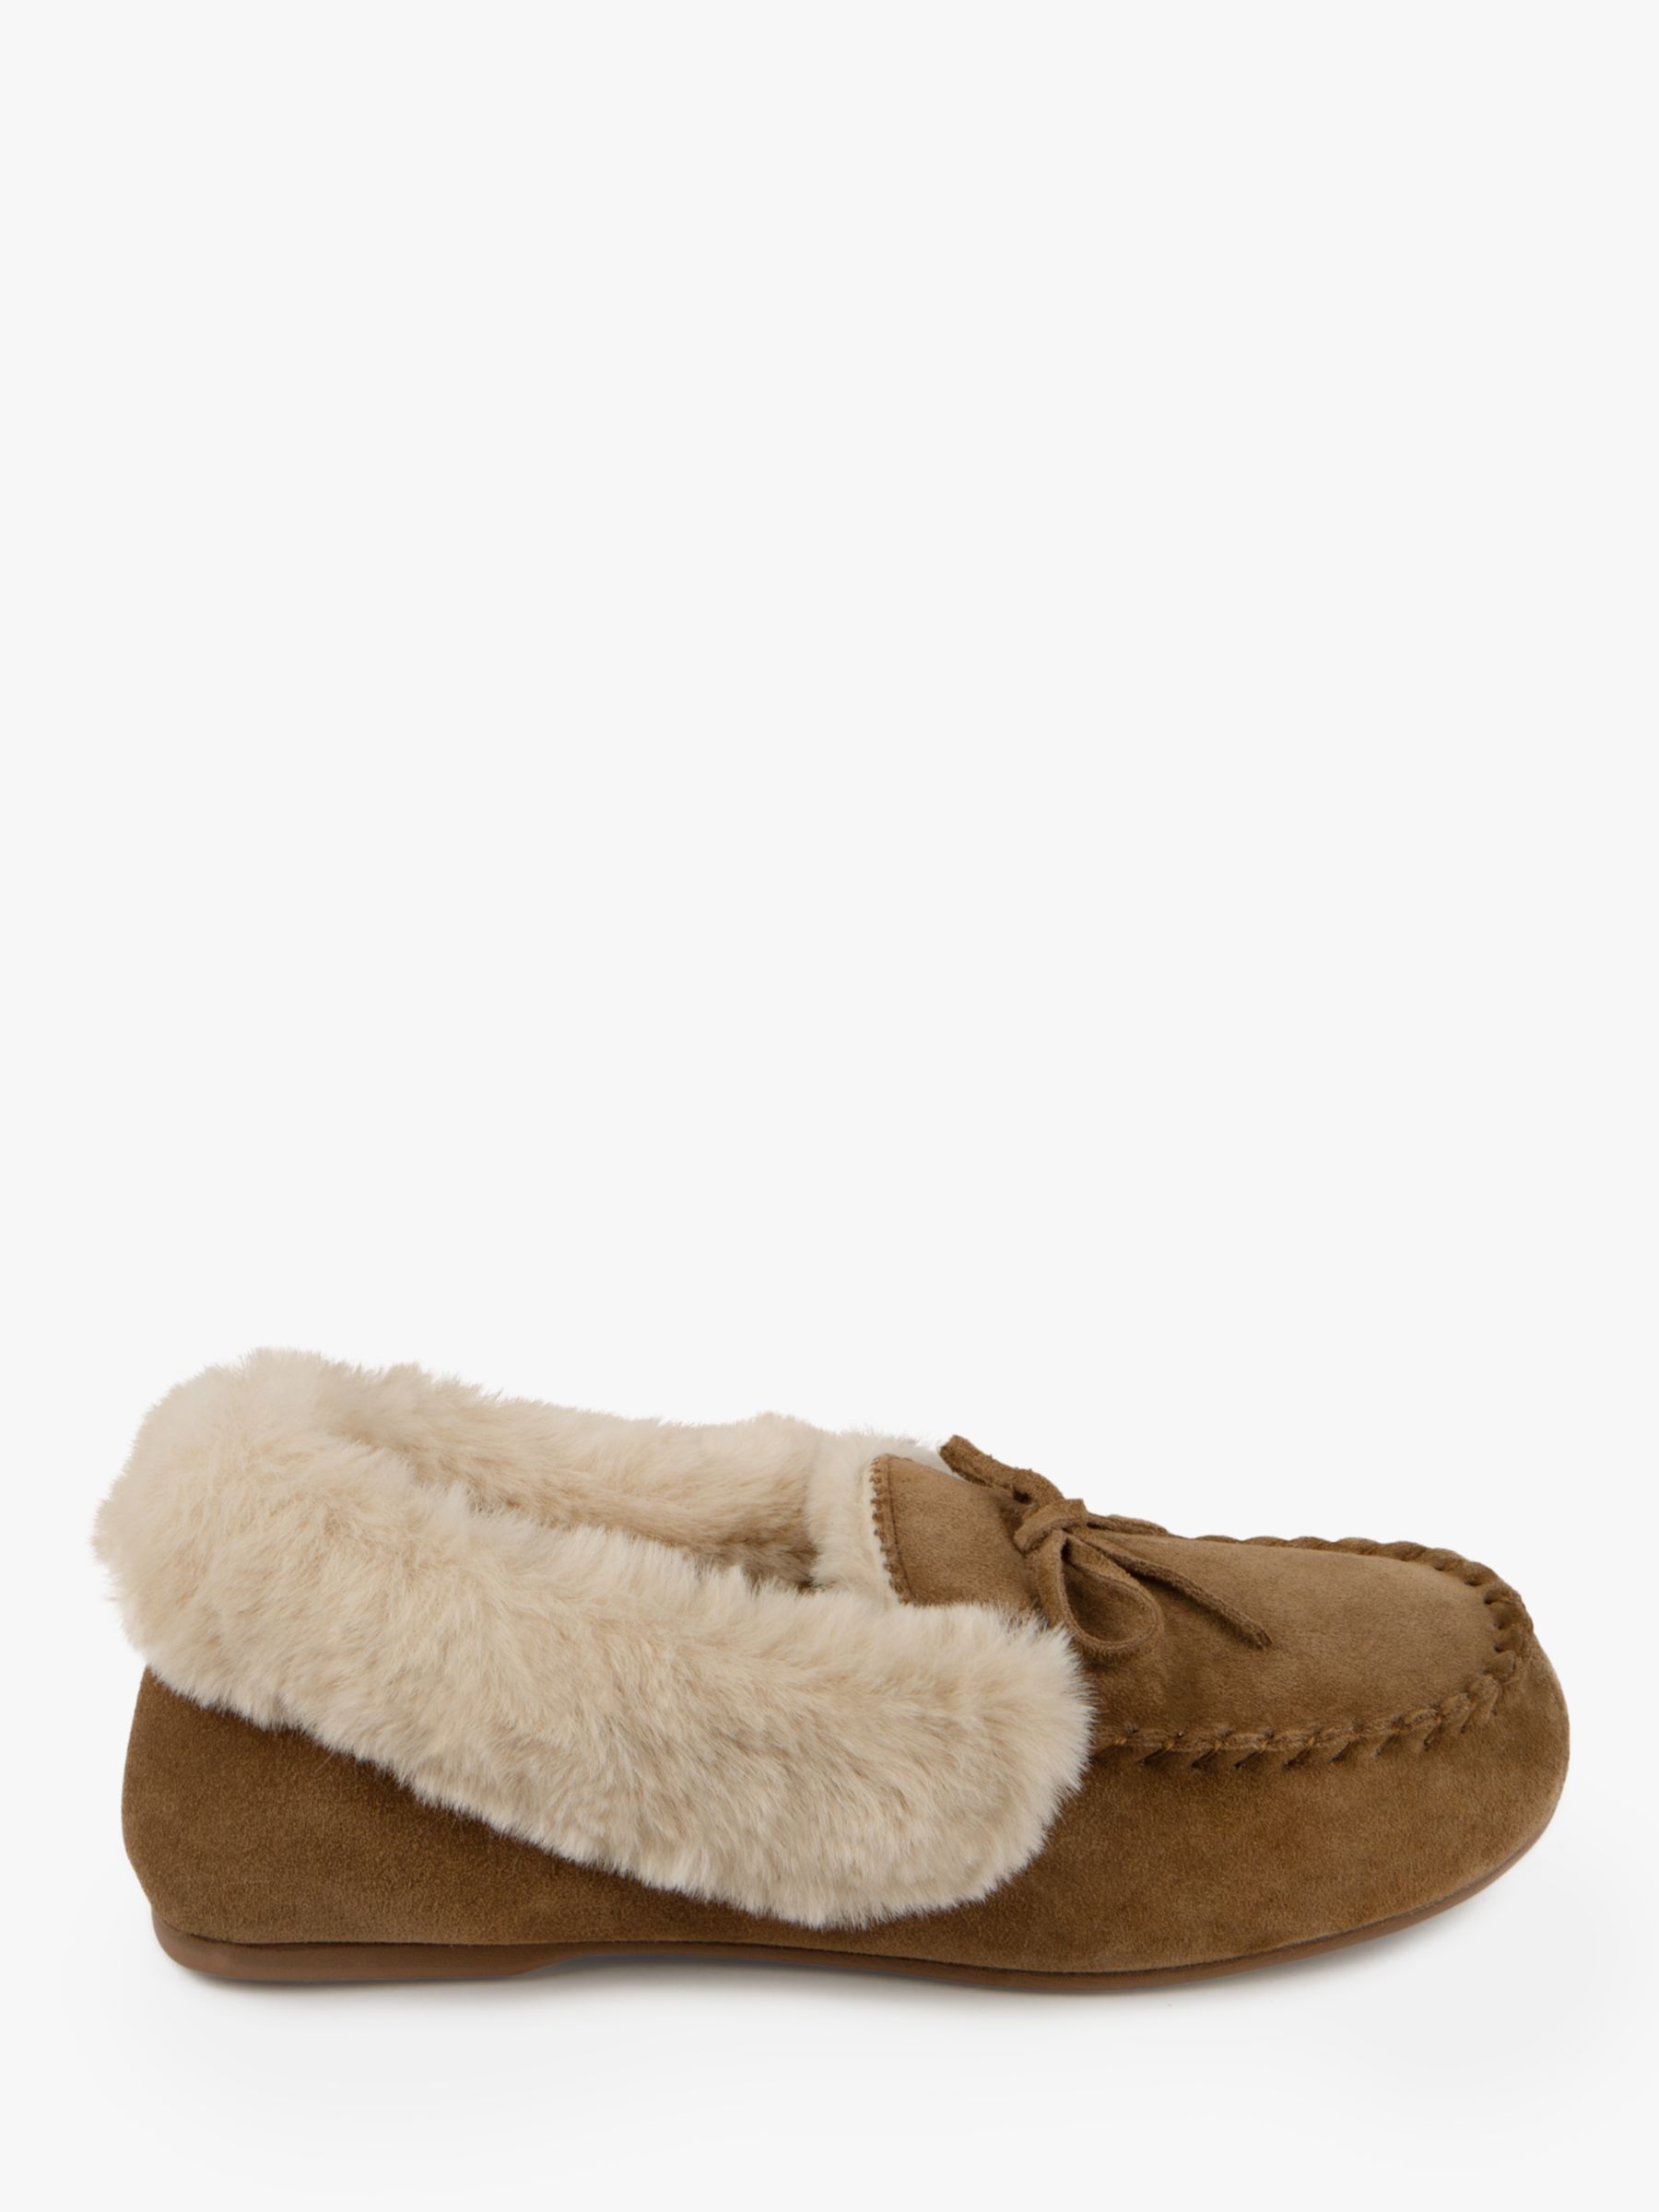 totes Genuine Suede Moccasin with Faux Fur Lining Slippers, Tan at John ...